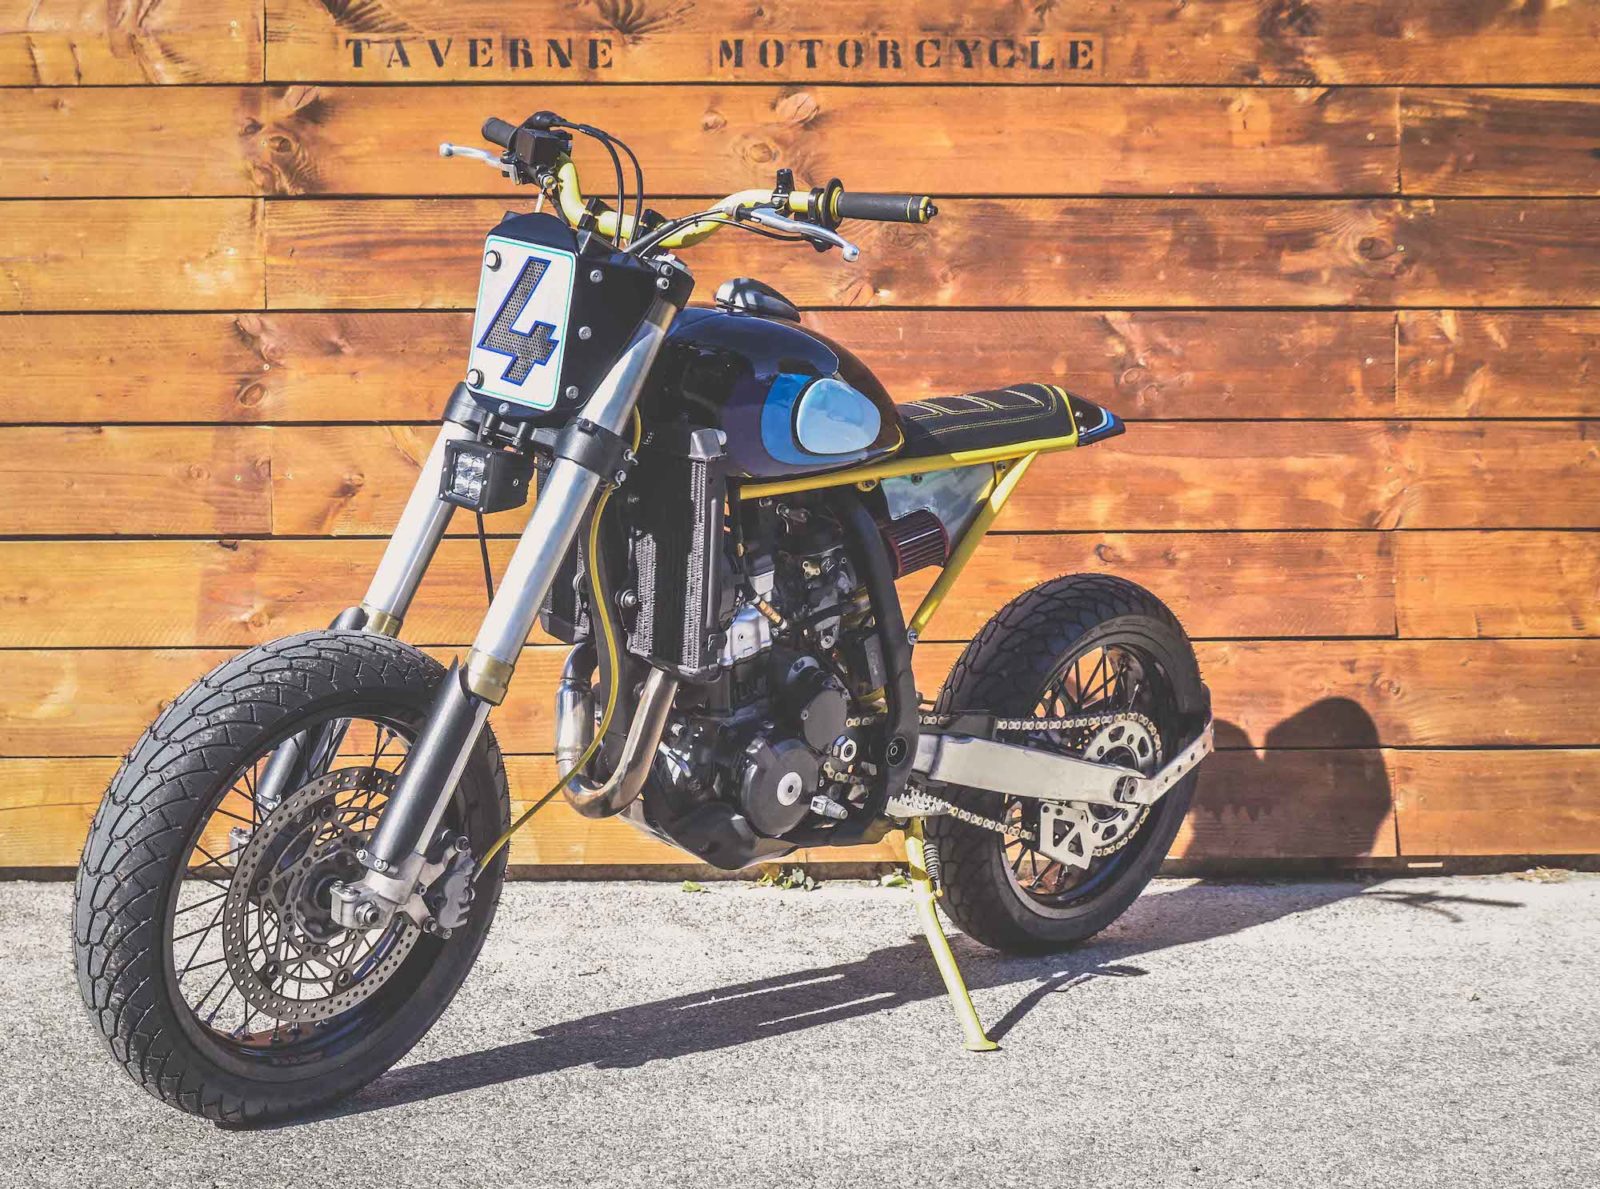 Taverne motorcycles Suzuki DRZ 400 custom cafe racer royal cambouis sud